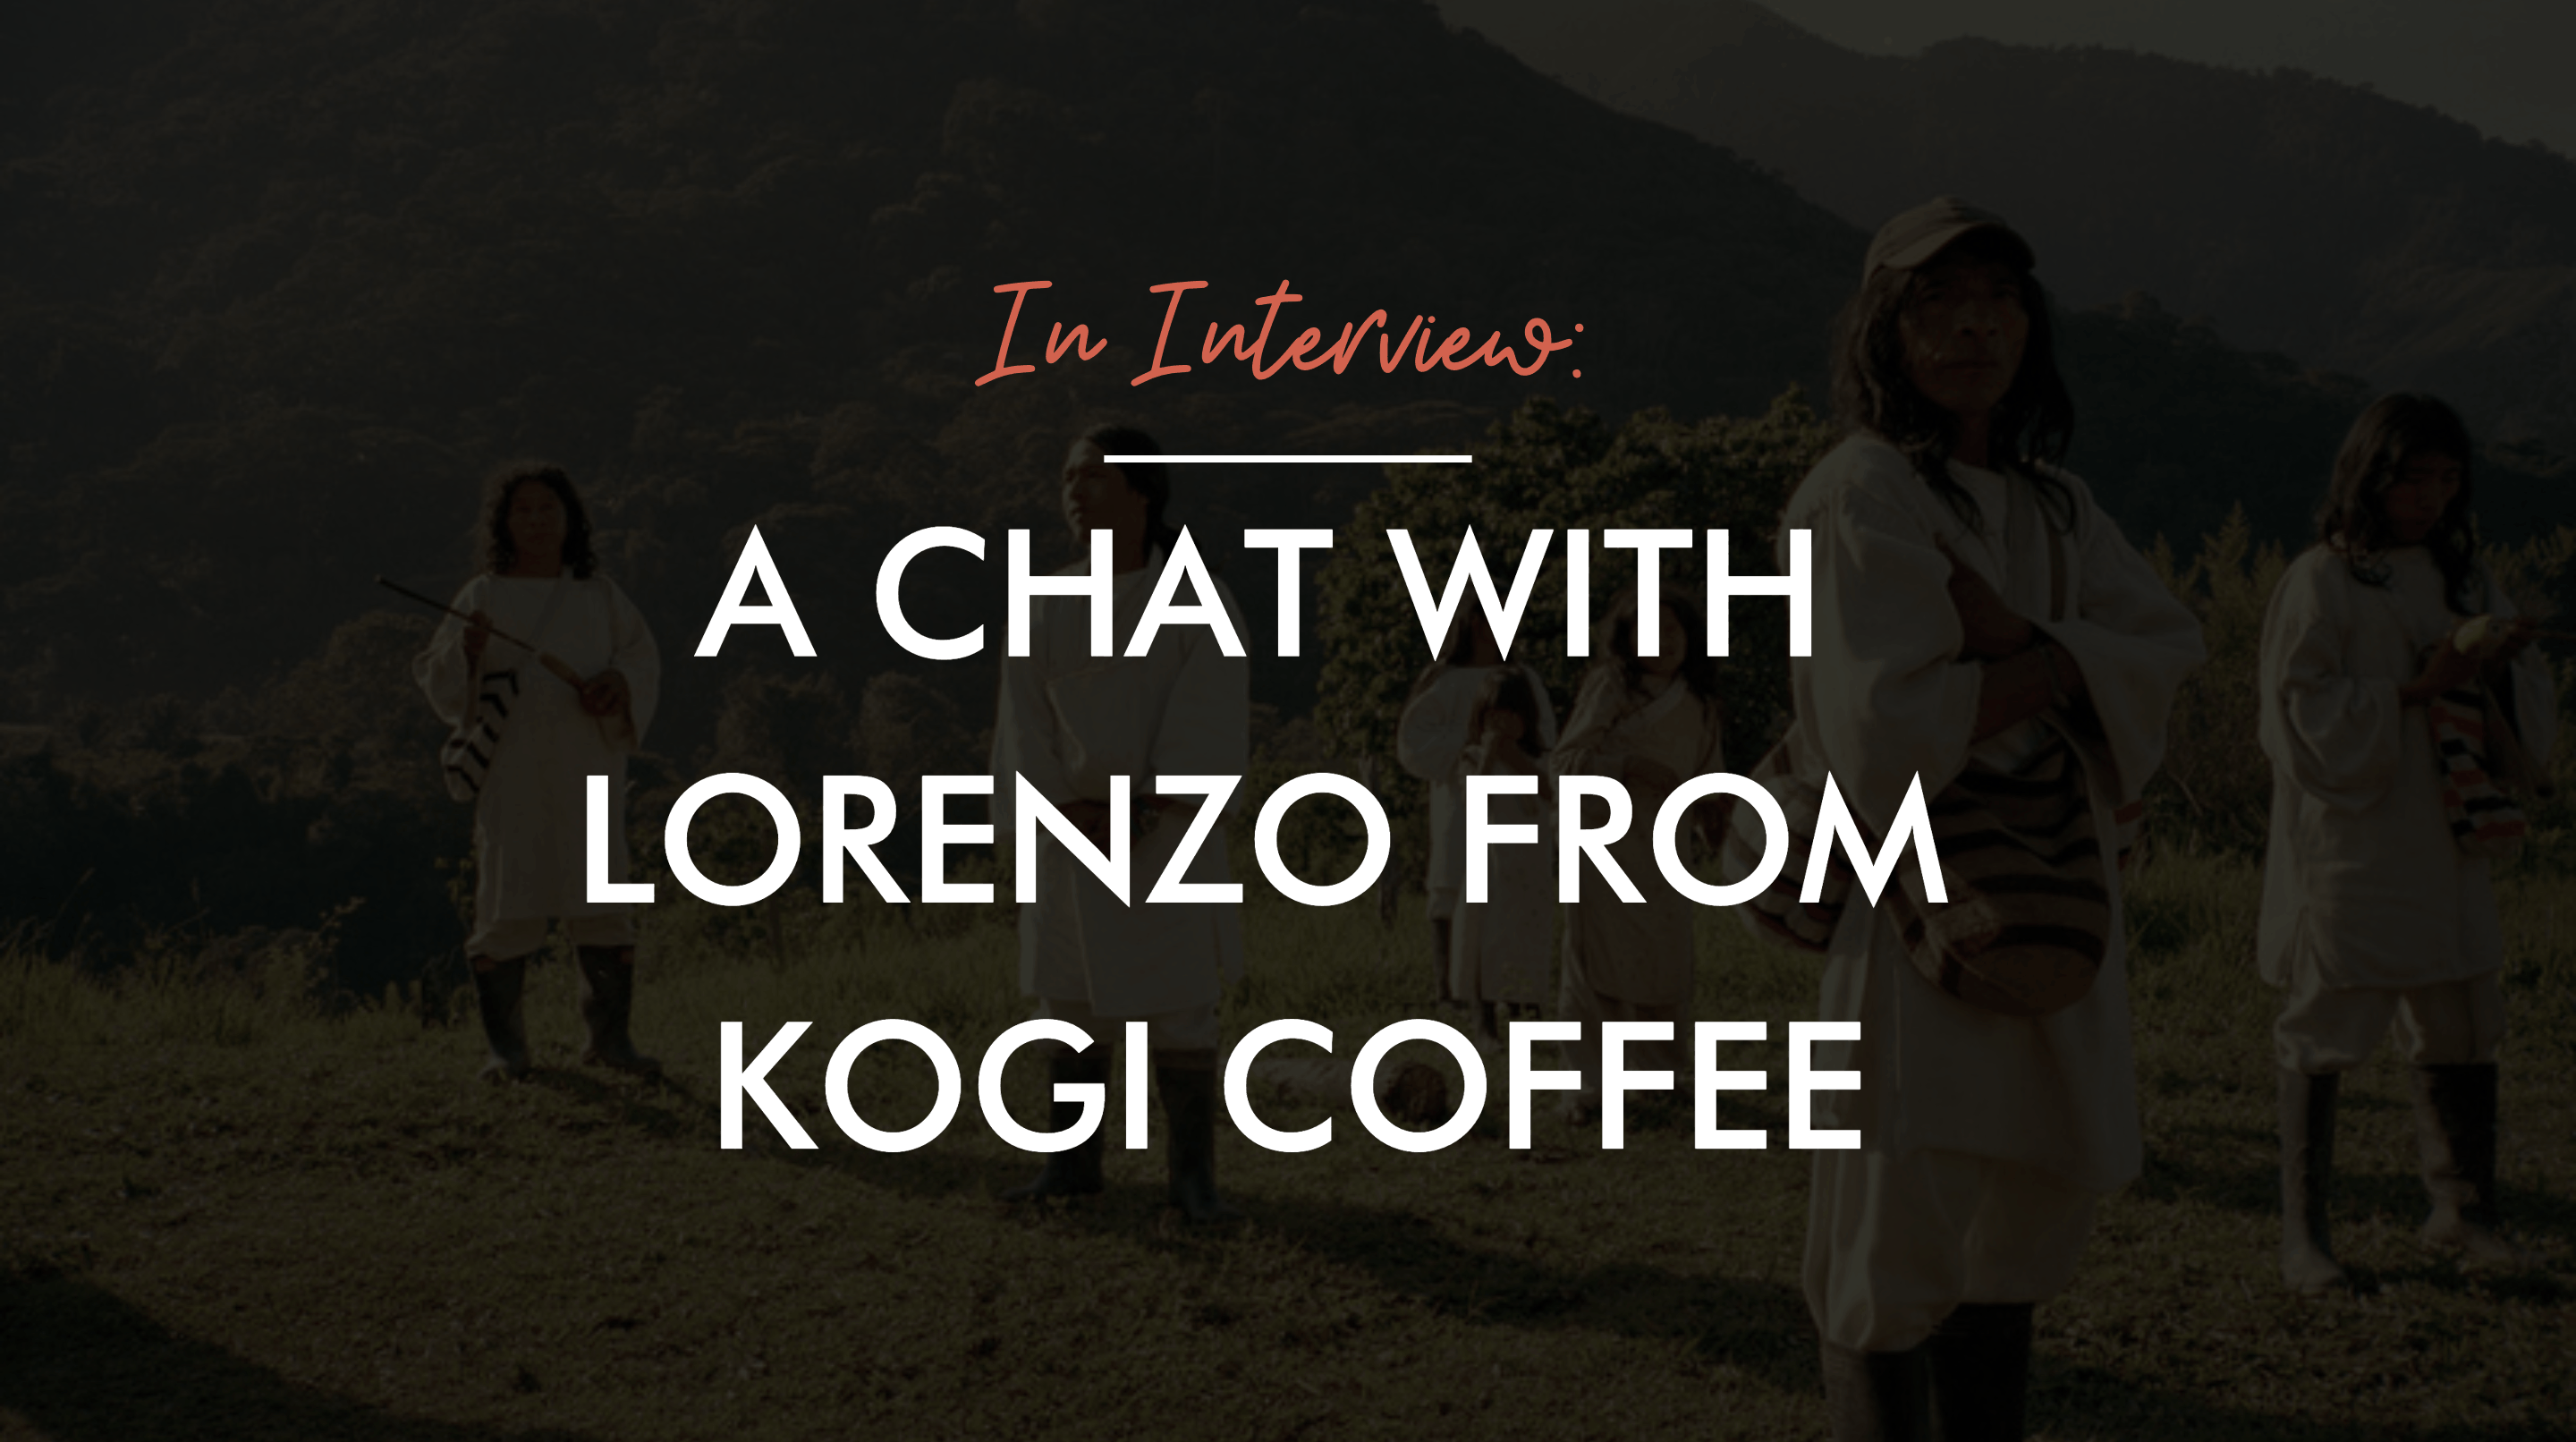 In Interview with Lorenzo from Kogi Coffee